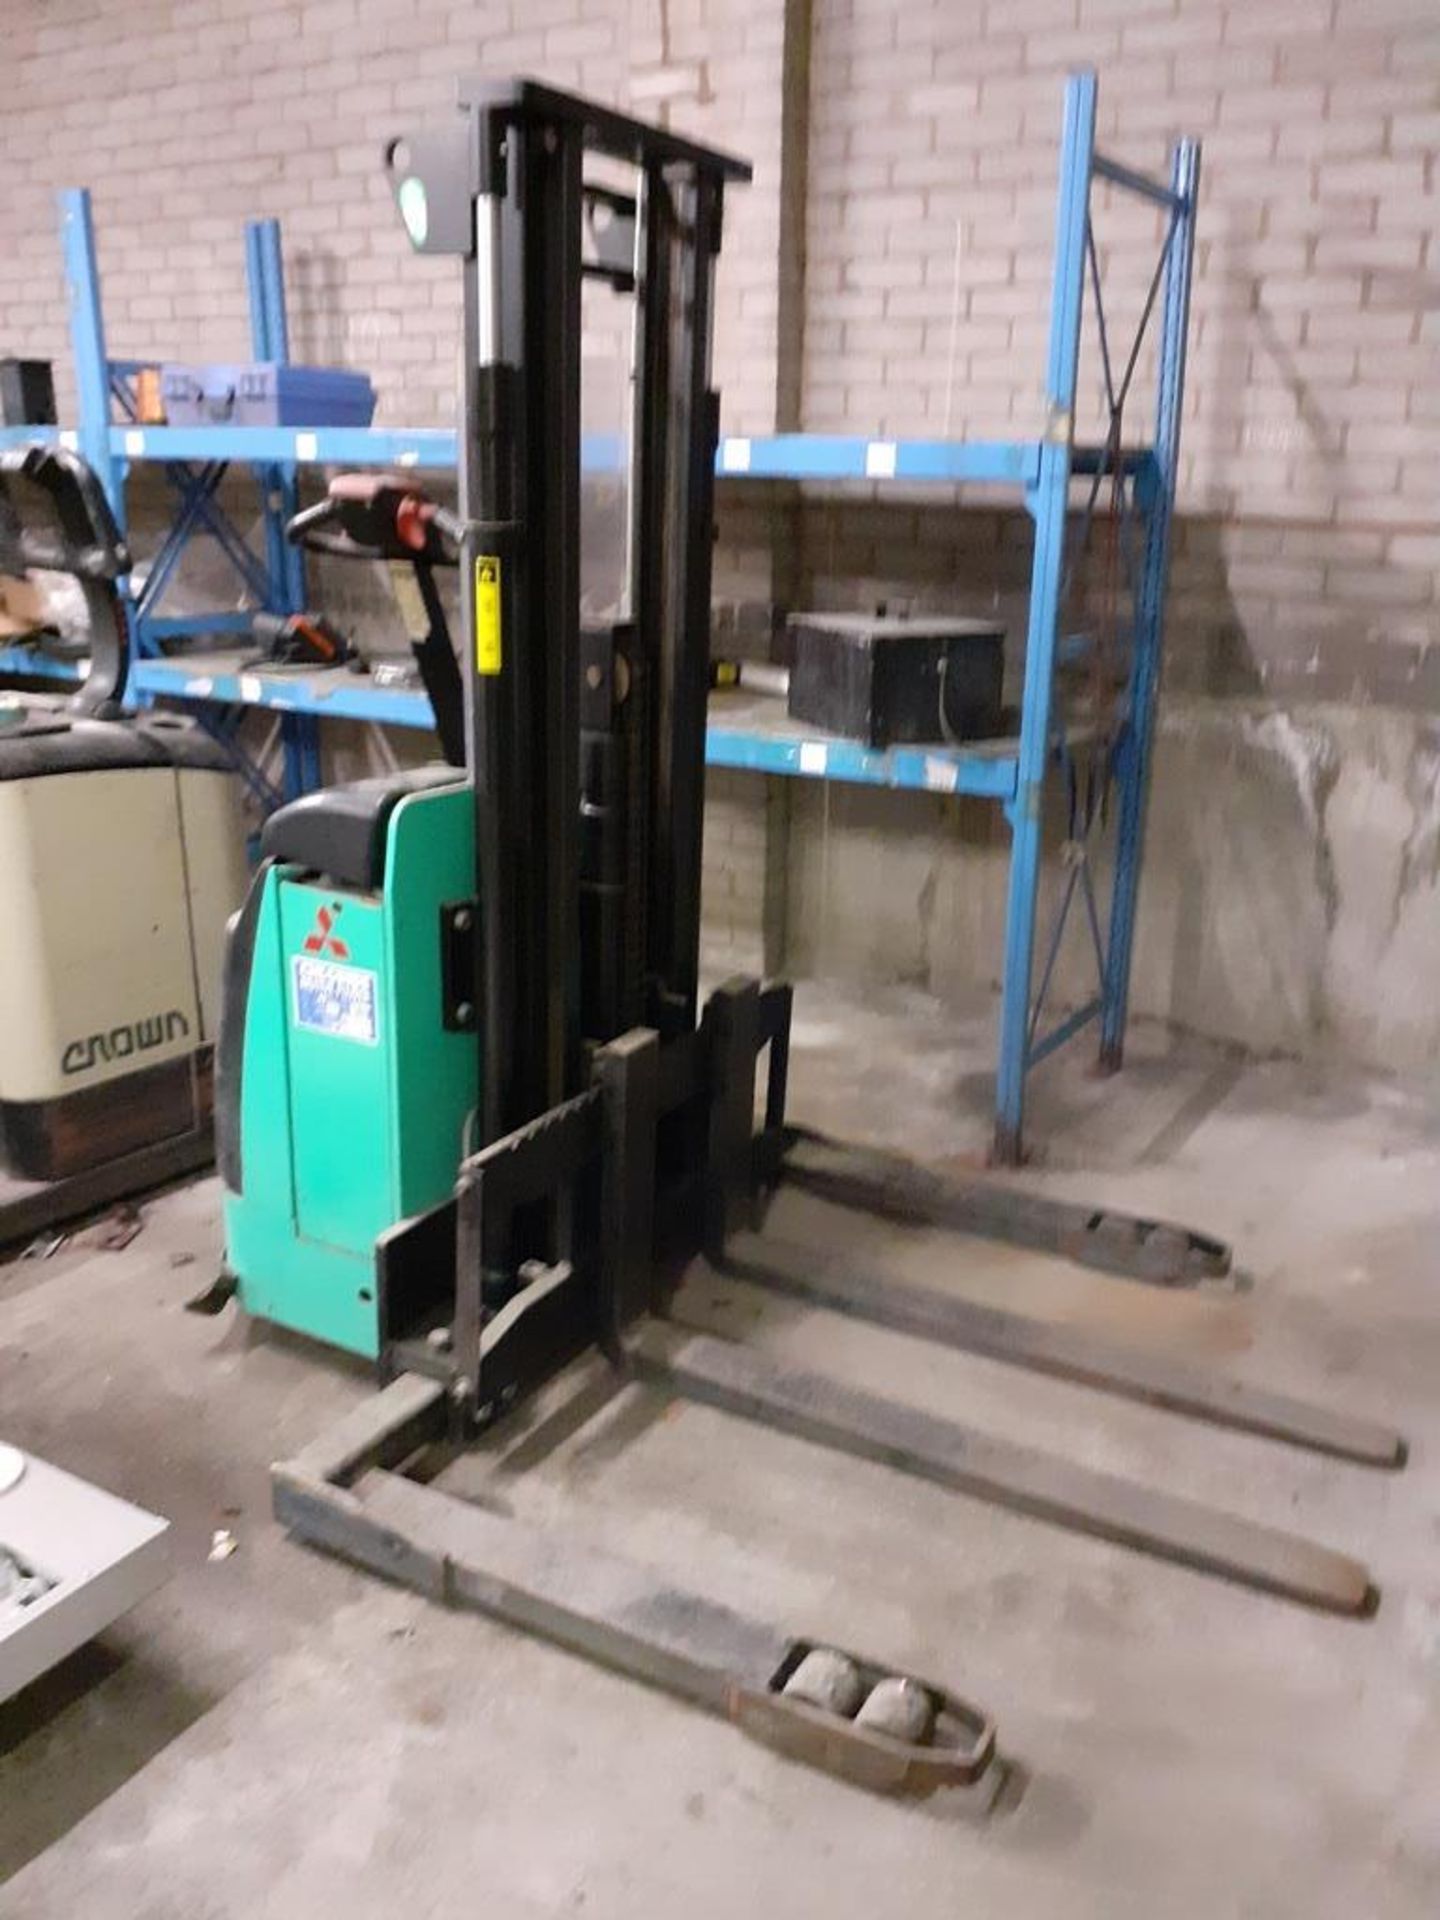 Mitsubishi pallet stacker No17, s/n SP1200215 and 3 - Mitsubishi electric pallet truck, s/n - Image 2 of 6